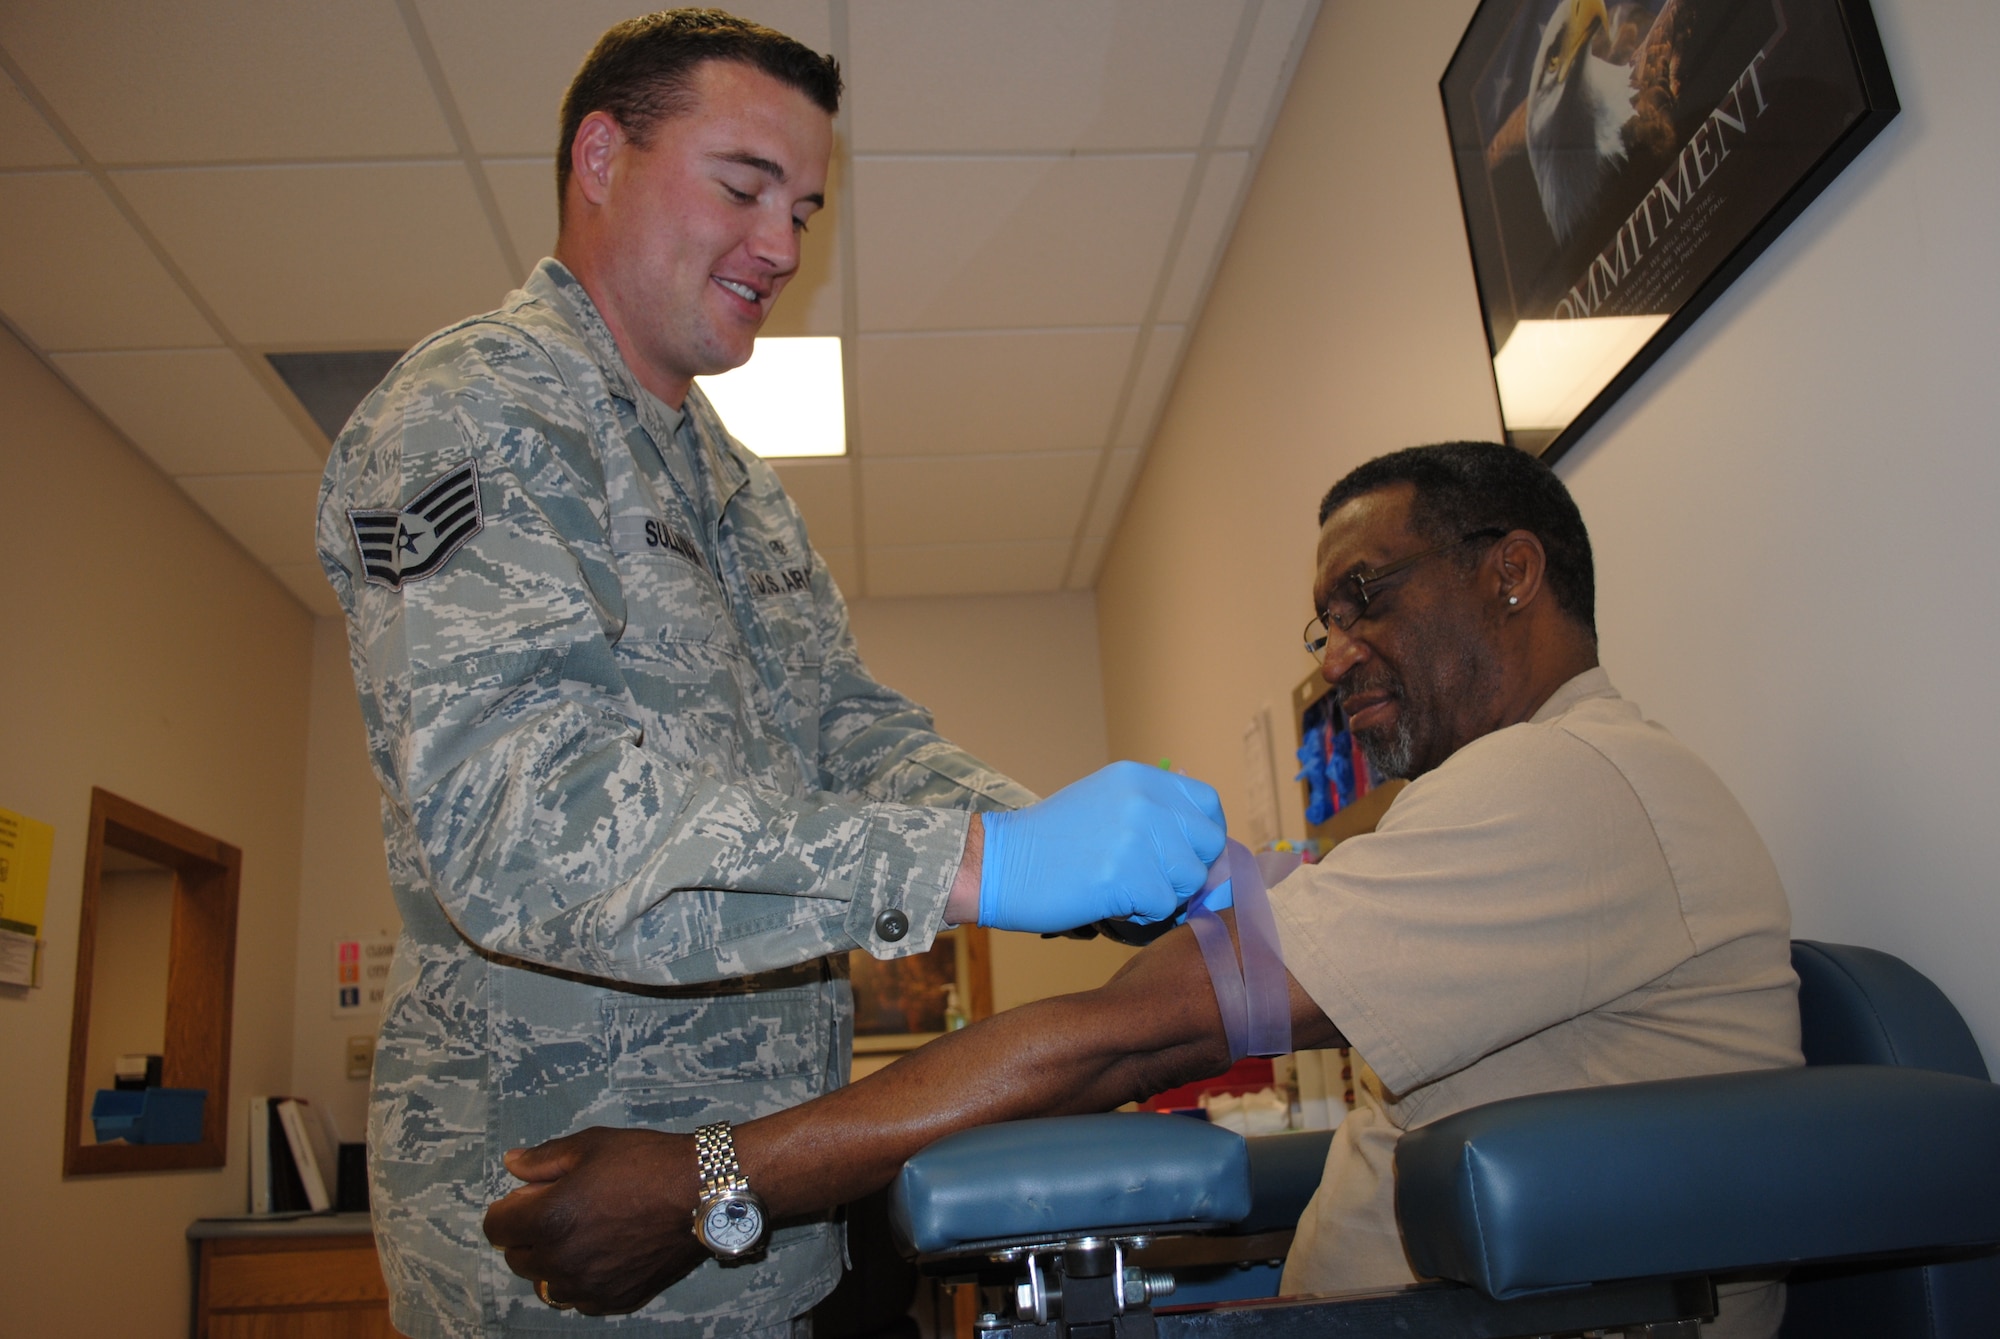 Staff Sgt. Thomas C. Sullivan Jr., 319th Medical Support Squadron laboratory technician, wraps the left arm of retired Master Sgt. Stephen Tyler with a rubber band prior to taking a blood sample May 22, 2013, at the medical laboratory on Grand Forks Air Force Base, N.D. Rubber bands restrict blood flow in the arm, which cause veins to dilate allowing lab techs to select the most suitable vein to draw a blood sample from. (U.S. Air Force photo/Staff Sgt. Luis Loza Gutierrez)
